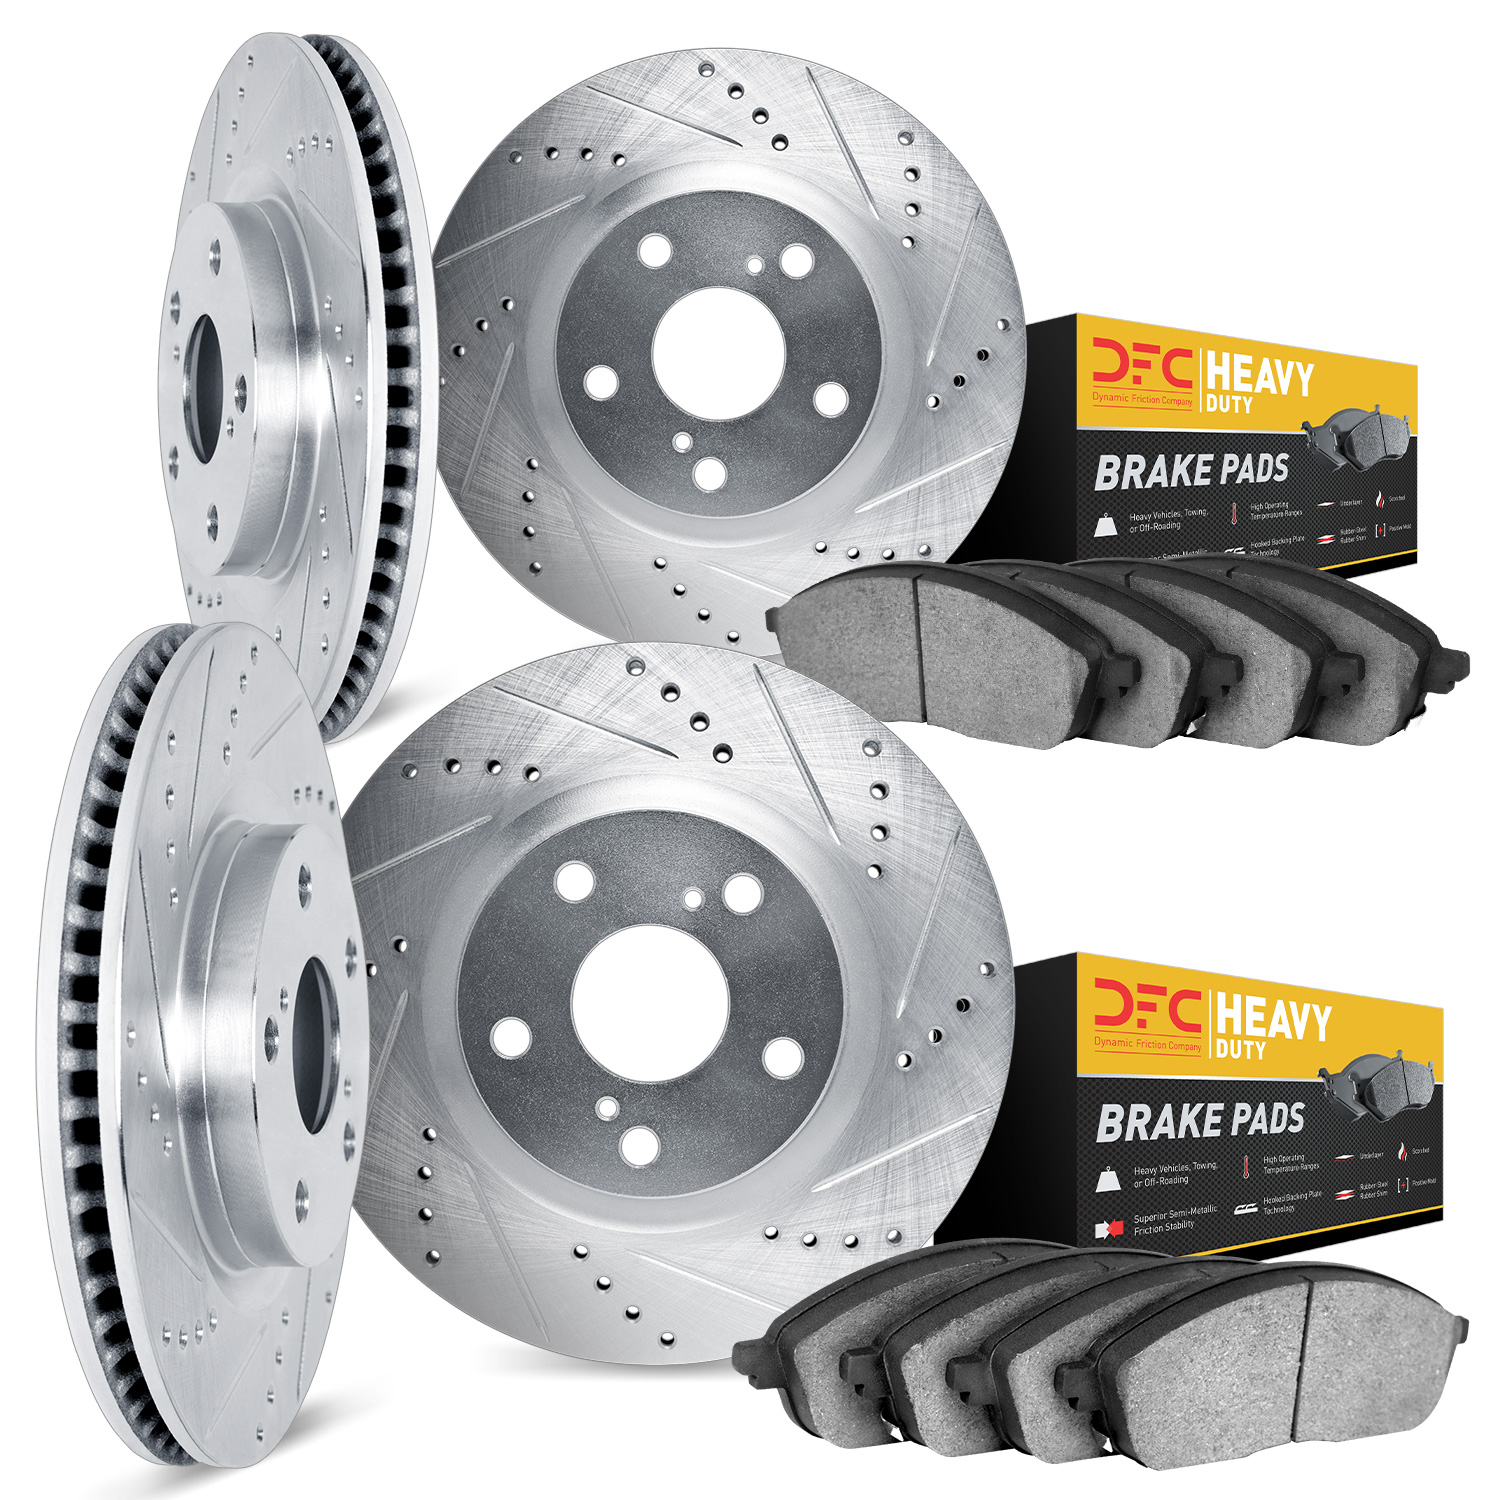 7204-40220 Drilled/Slotted Rotors w/Heavy-Duty Brake Pads Kit [Silver], 2002-2006 Mopar, Position: Front and Rear